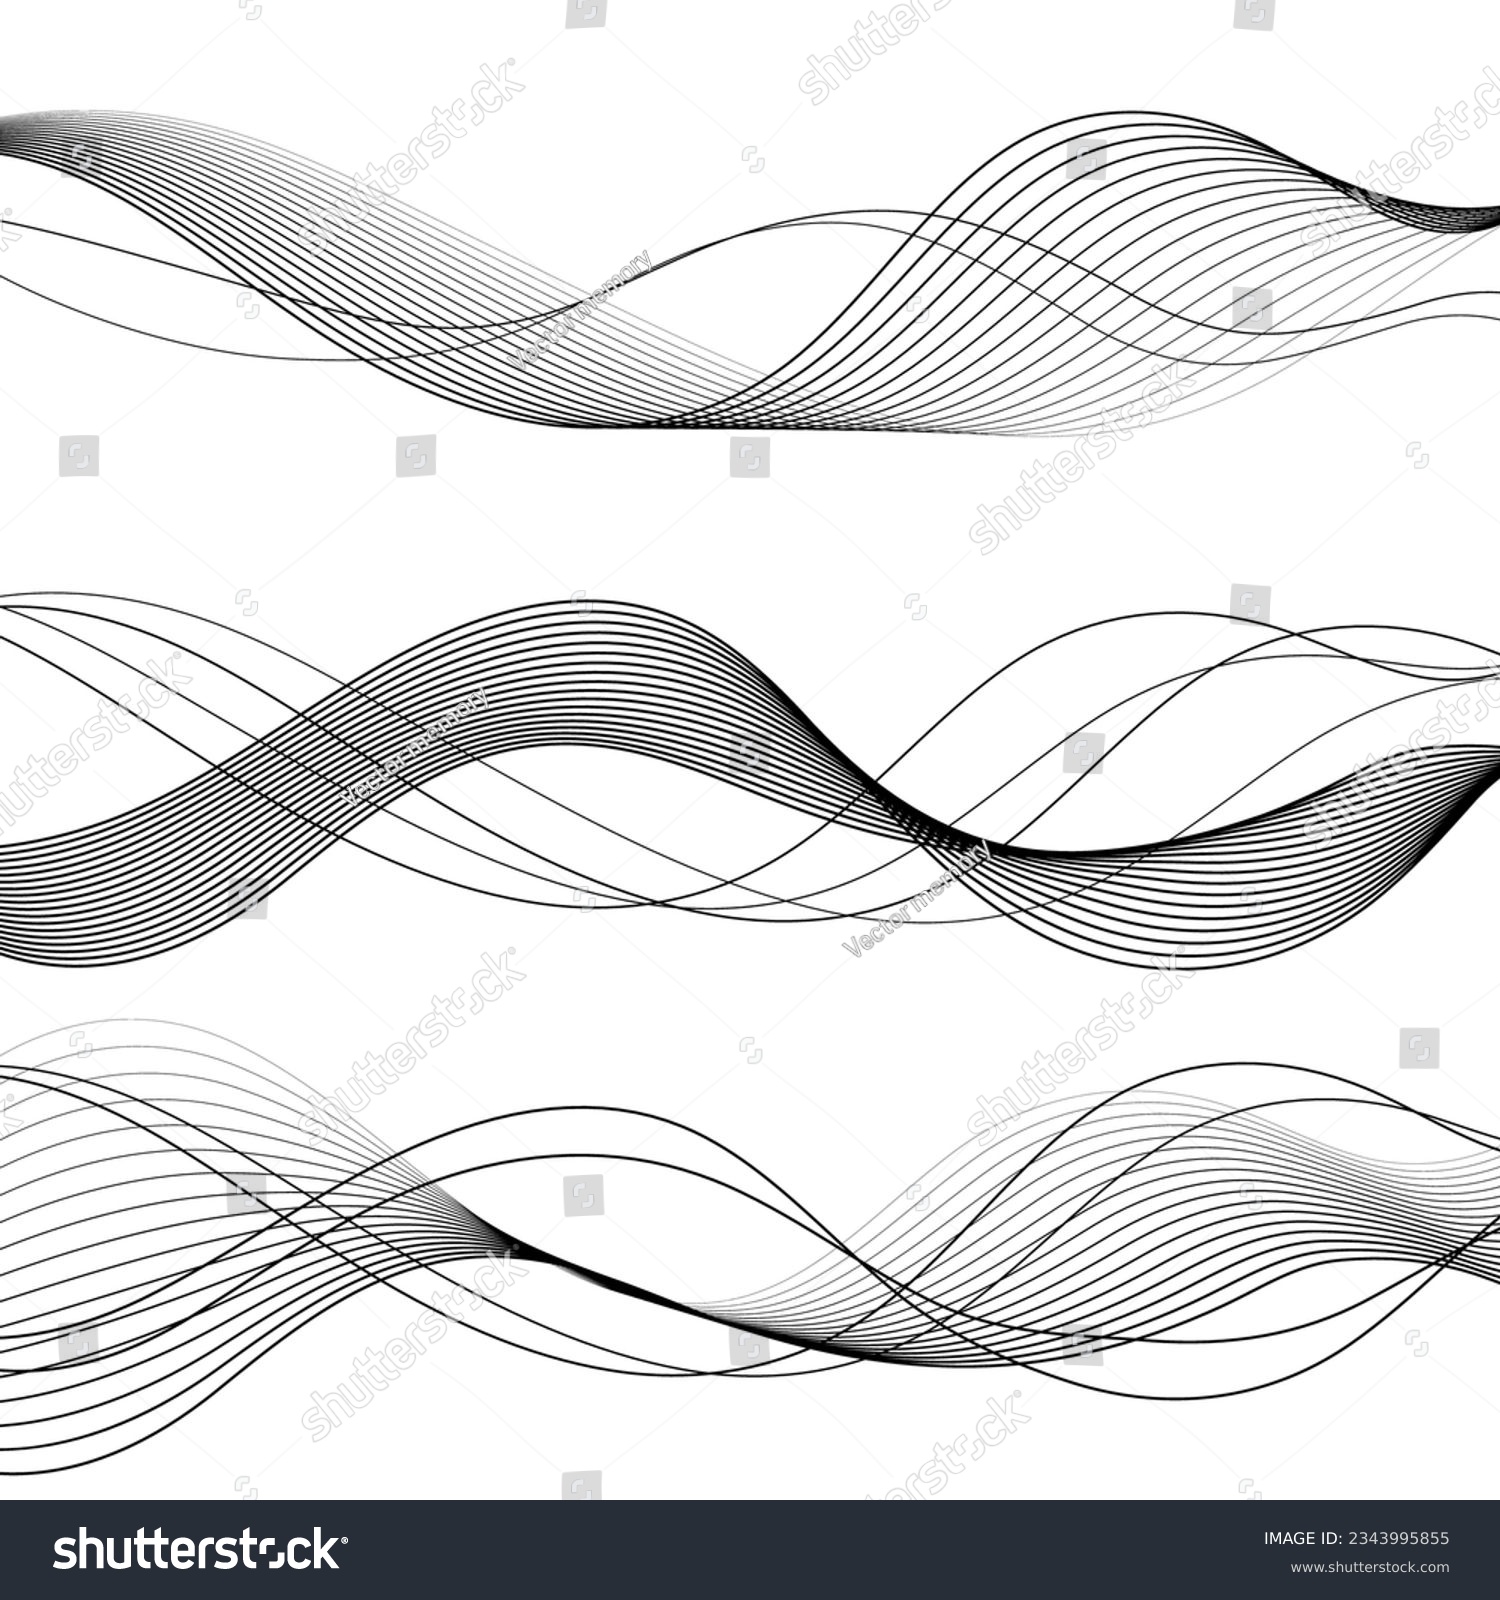 SVG of Abstract wave element for design. Digital frequency track equalizer. Stylized line art background. Vector illustration. Wave with lines created using blend tool. Curved wavy line, smooth stripe. svg